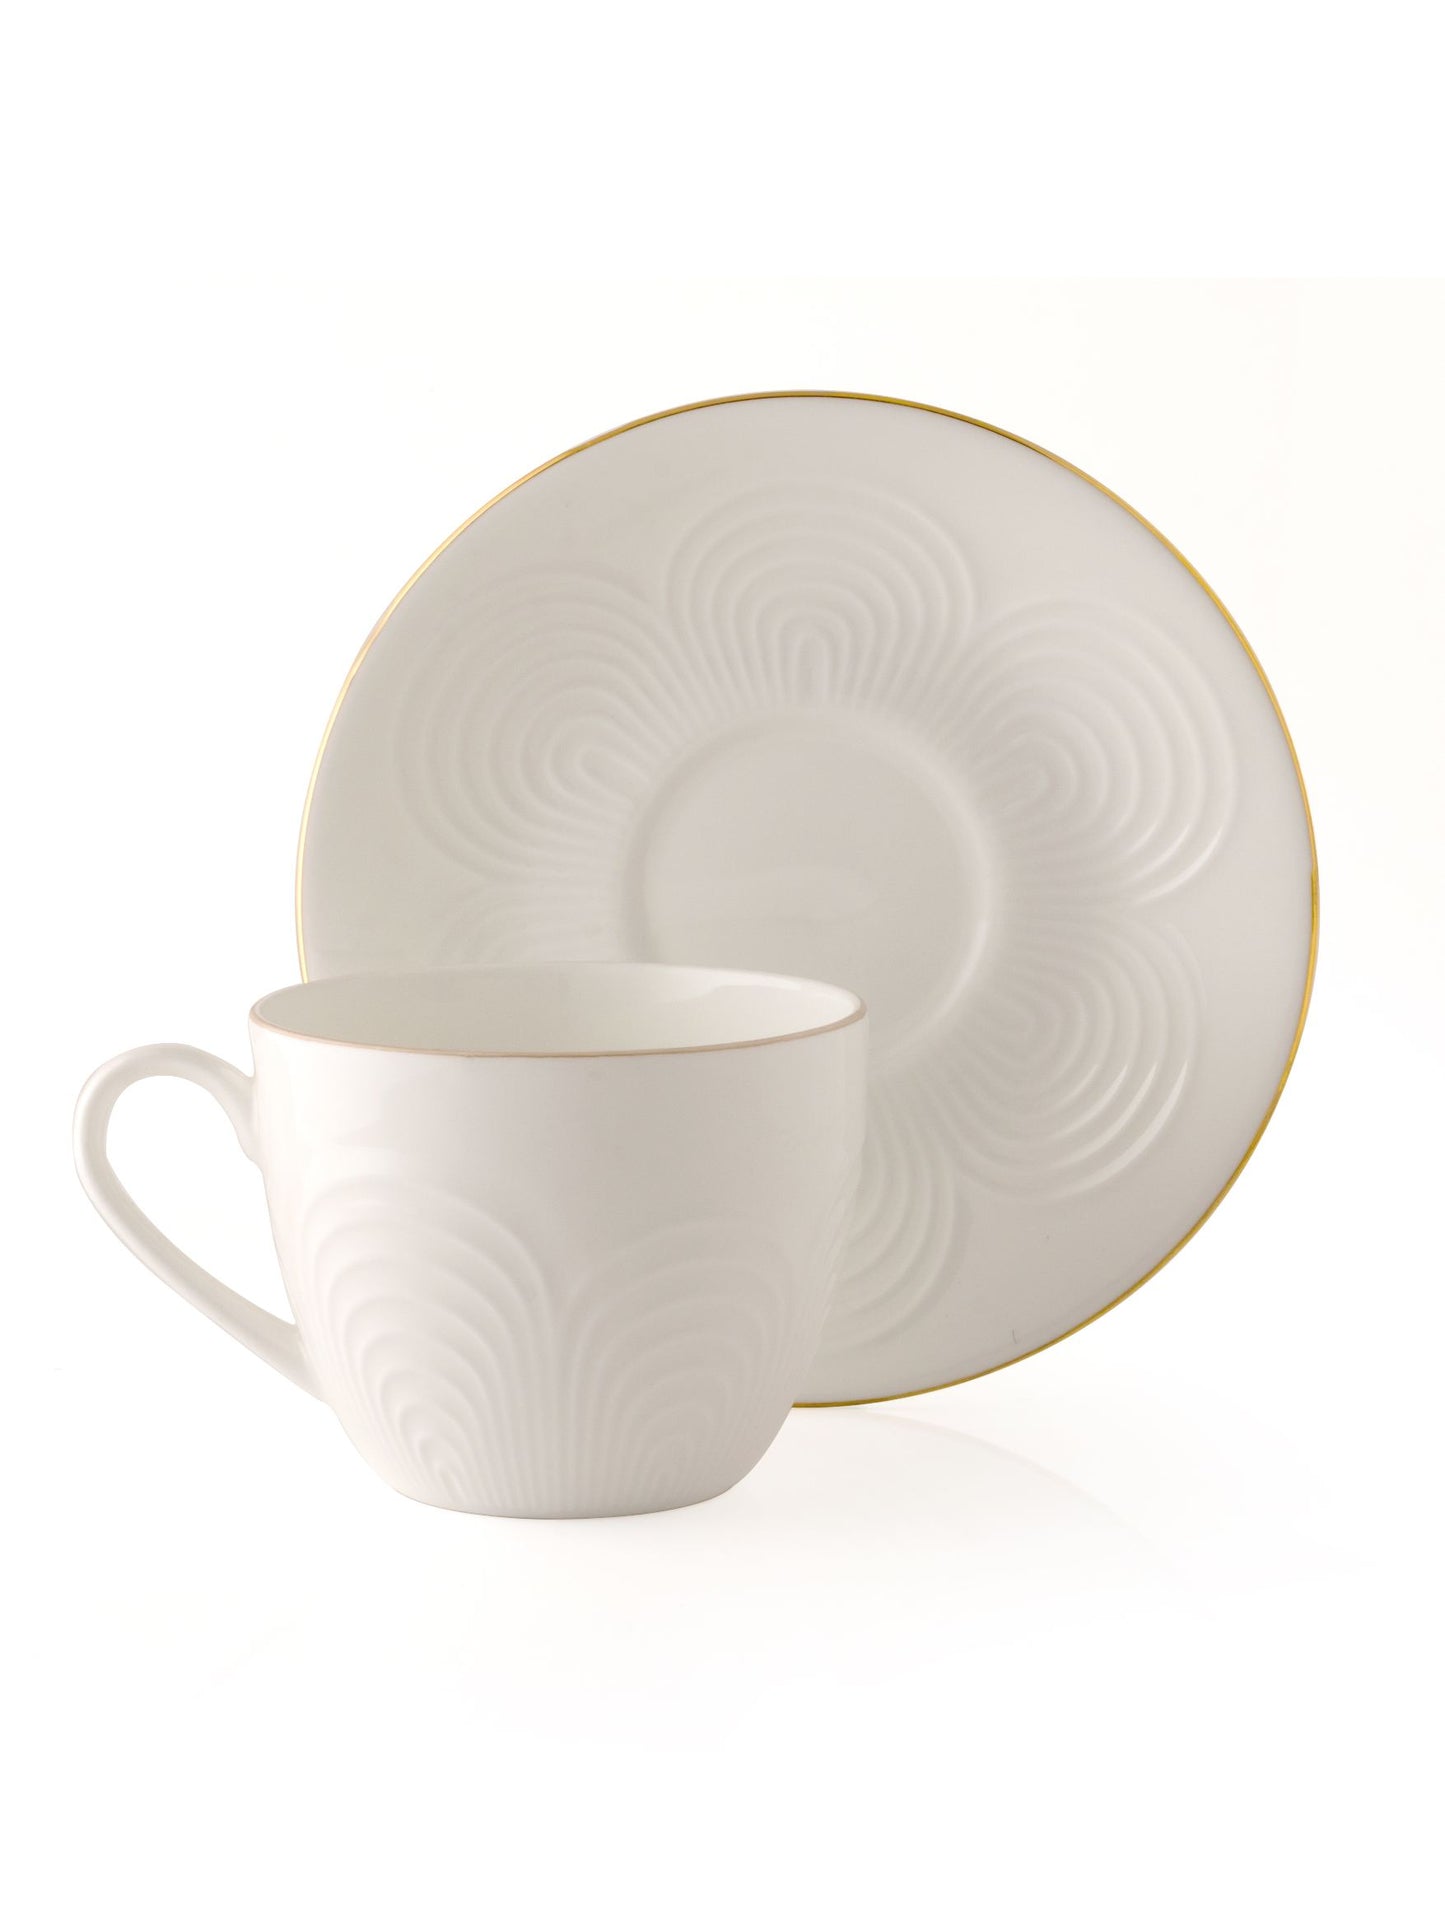 Palm Impression Cup & Saucer, 170ml, Set of 12 (6 Cups + 6 Saucers) (1101)